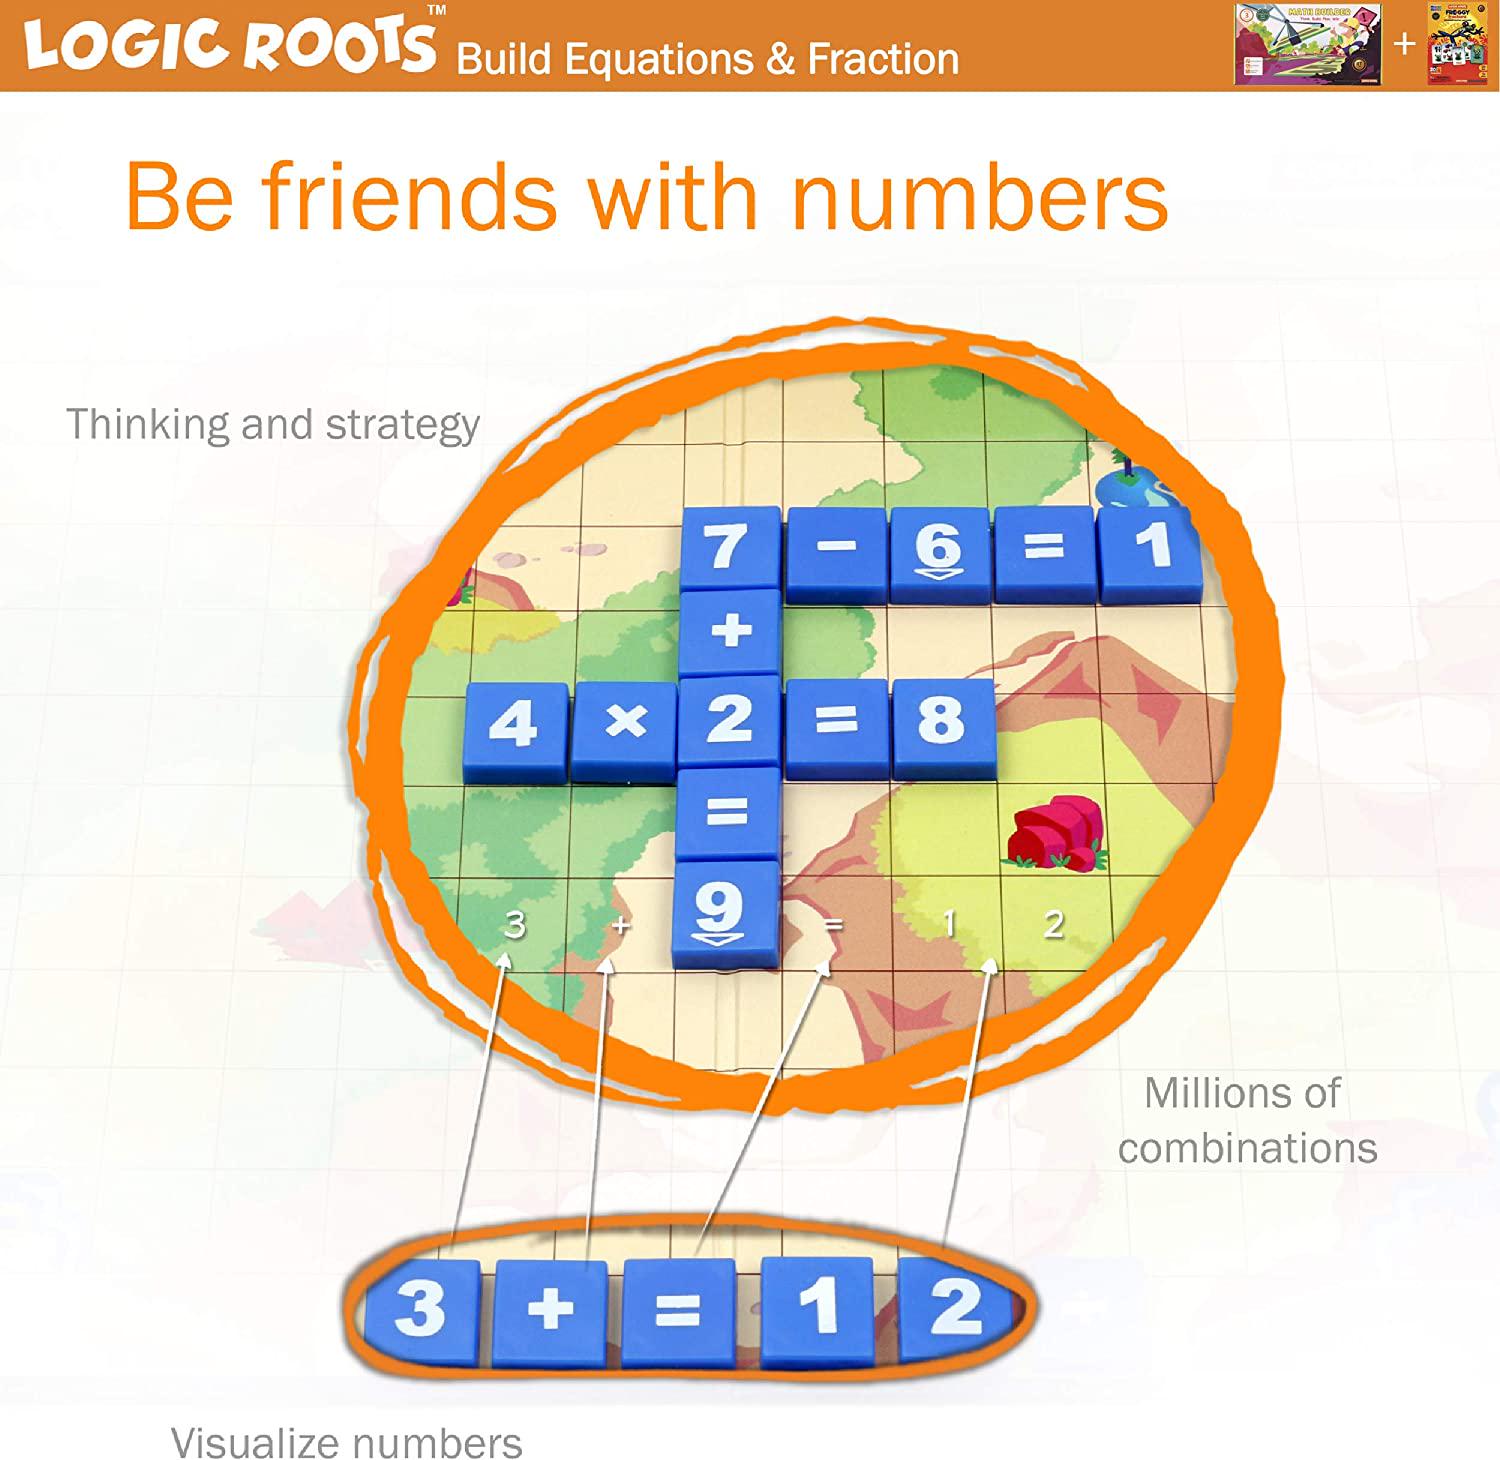 Logic Roots, Logic Roots 2 Math Manipulatives - 124 Number Tiles, 25 Fraction Tiles and 72 Fraction Cards. Learn Addition, Subtraction, Multiplication, Division and Fractions for Kids 8,9,10,11 and 12 Year olds